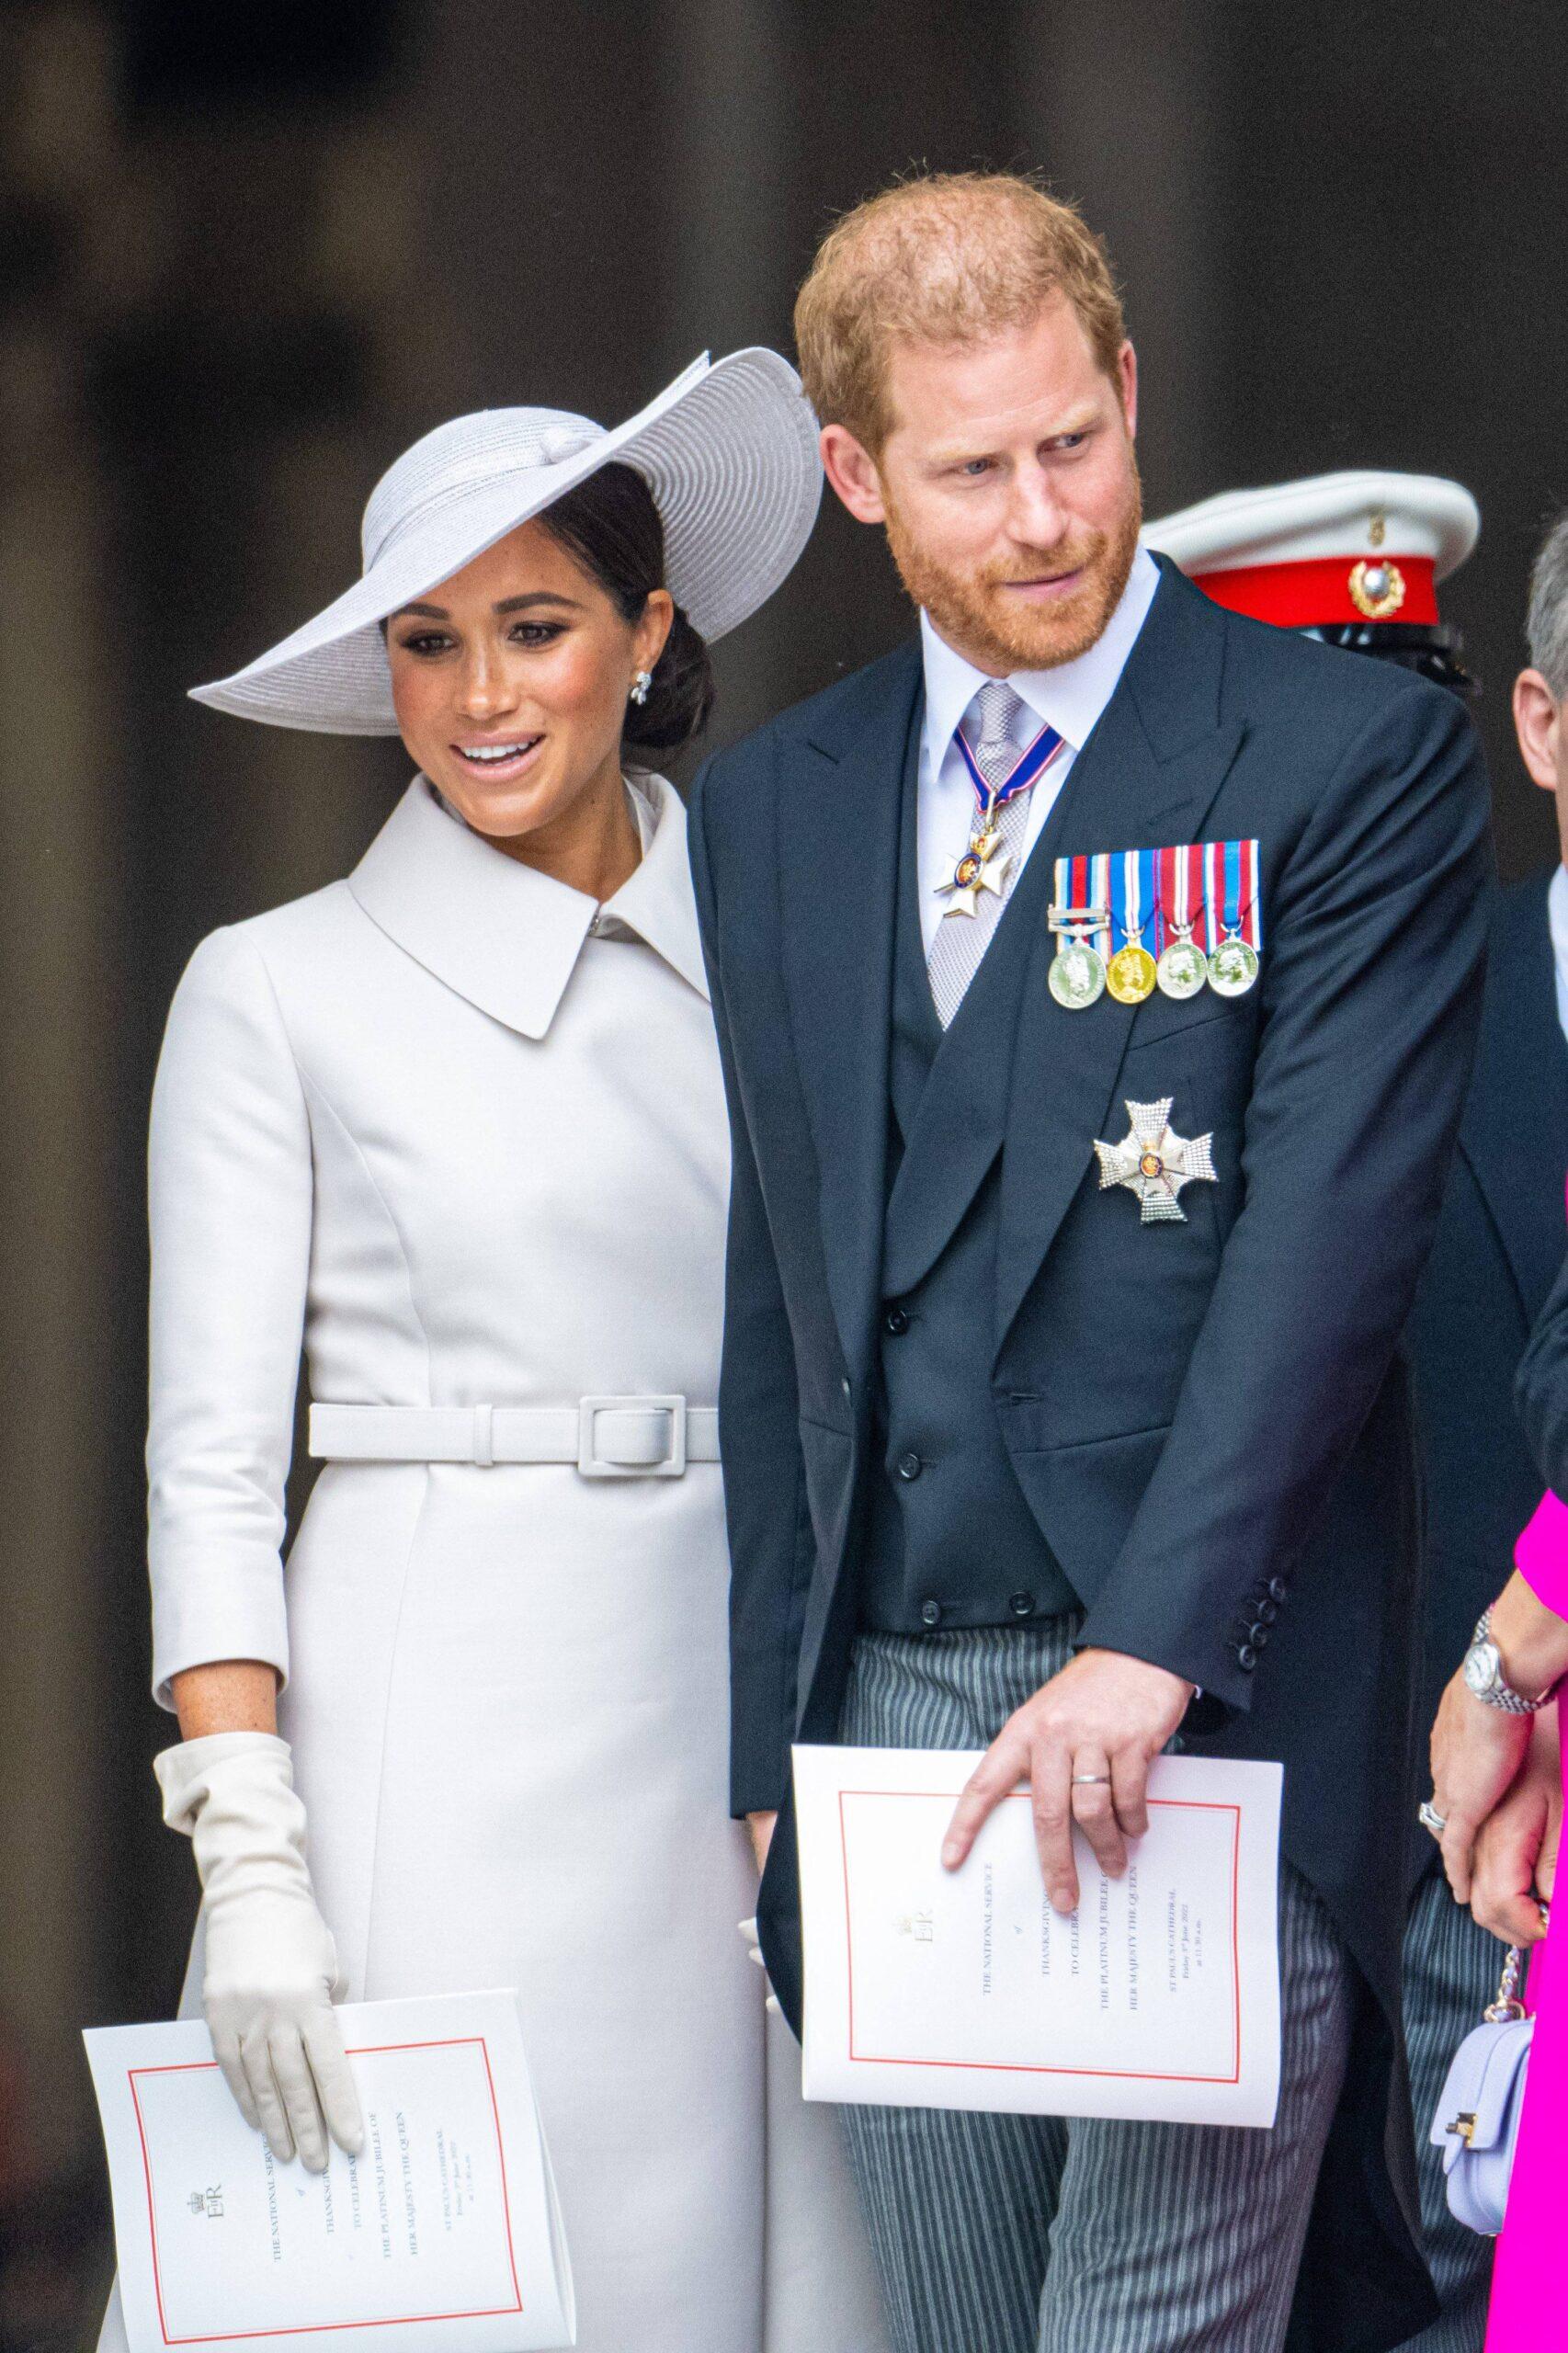 Prince Harry Duke of Sussex and Meghan Markle Duchess of Sussex attending the Service of Thanksgiving for the Queen, marking the monarch's 70 year Platinum Jubilee, at St Paul’s Cathedral in London